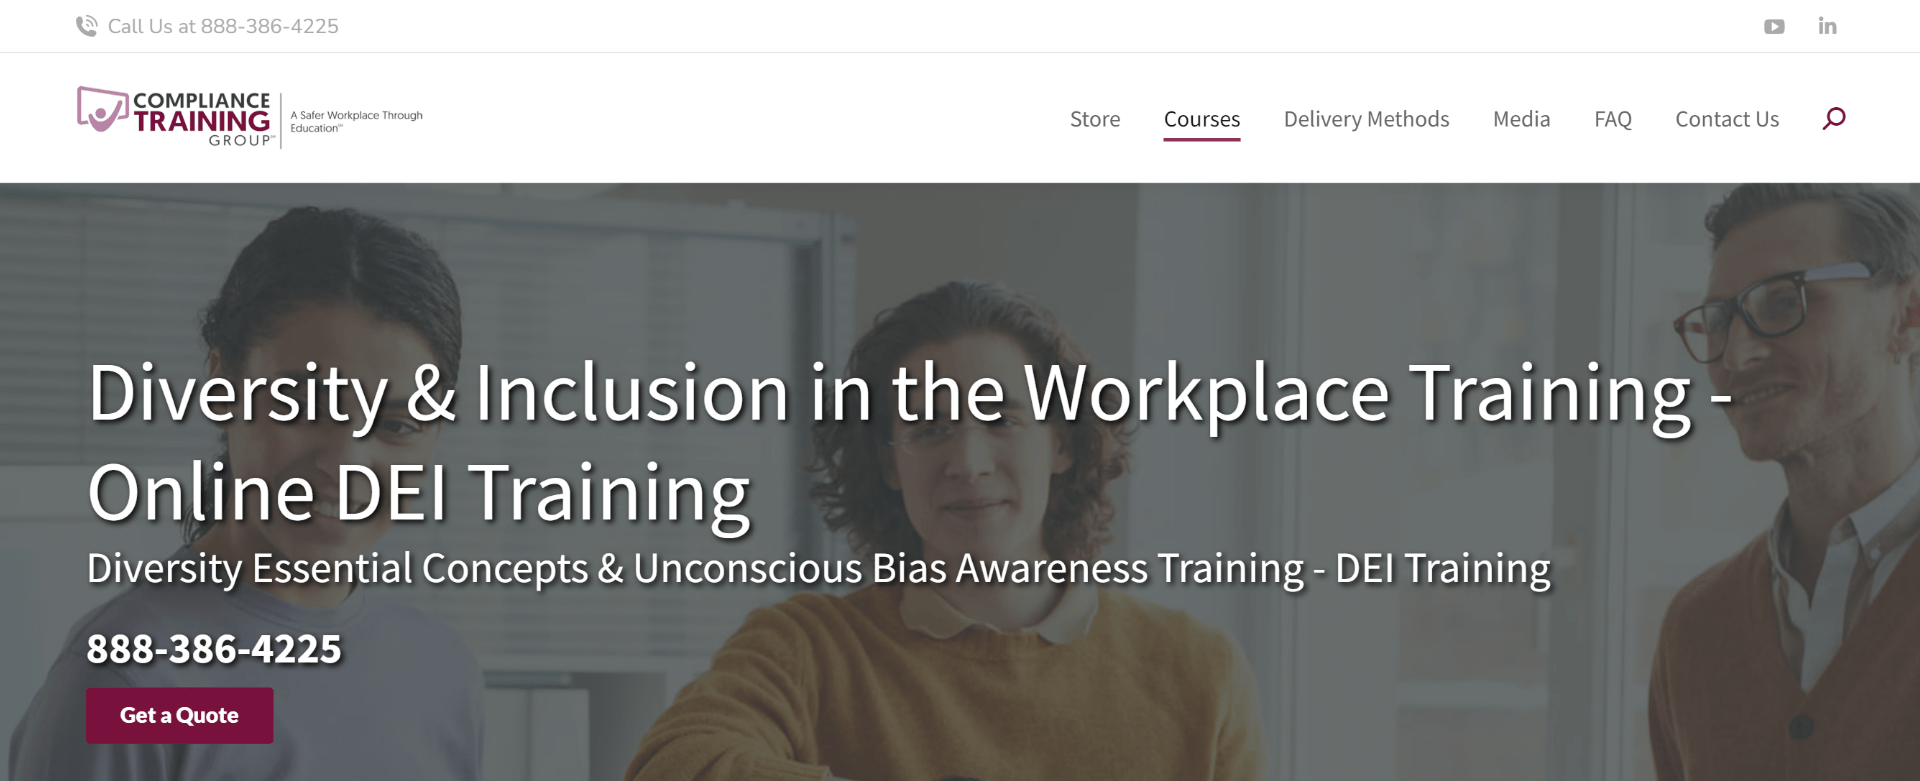 Diversity & Inclusion Training by Compliance Training Group